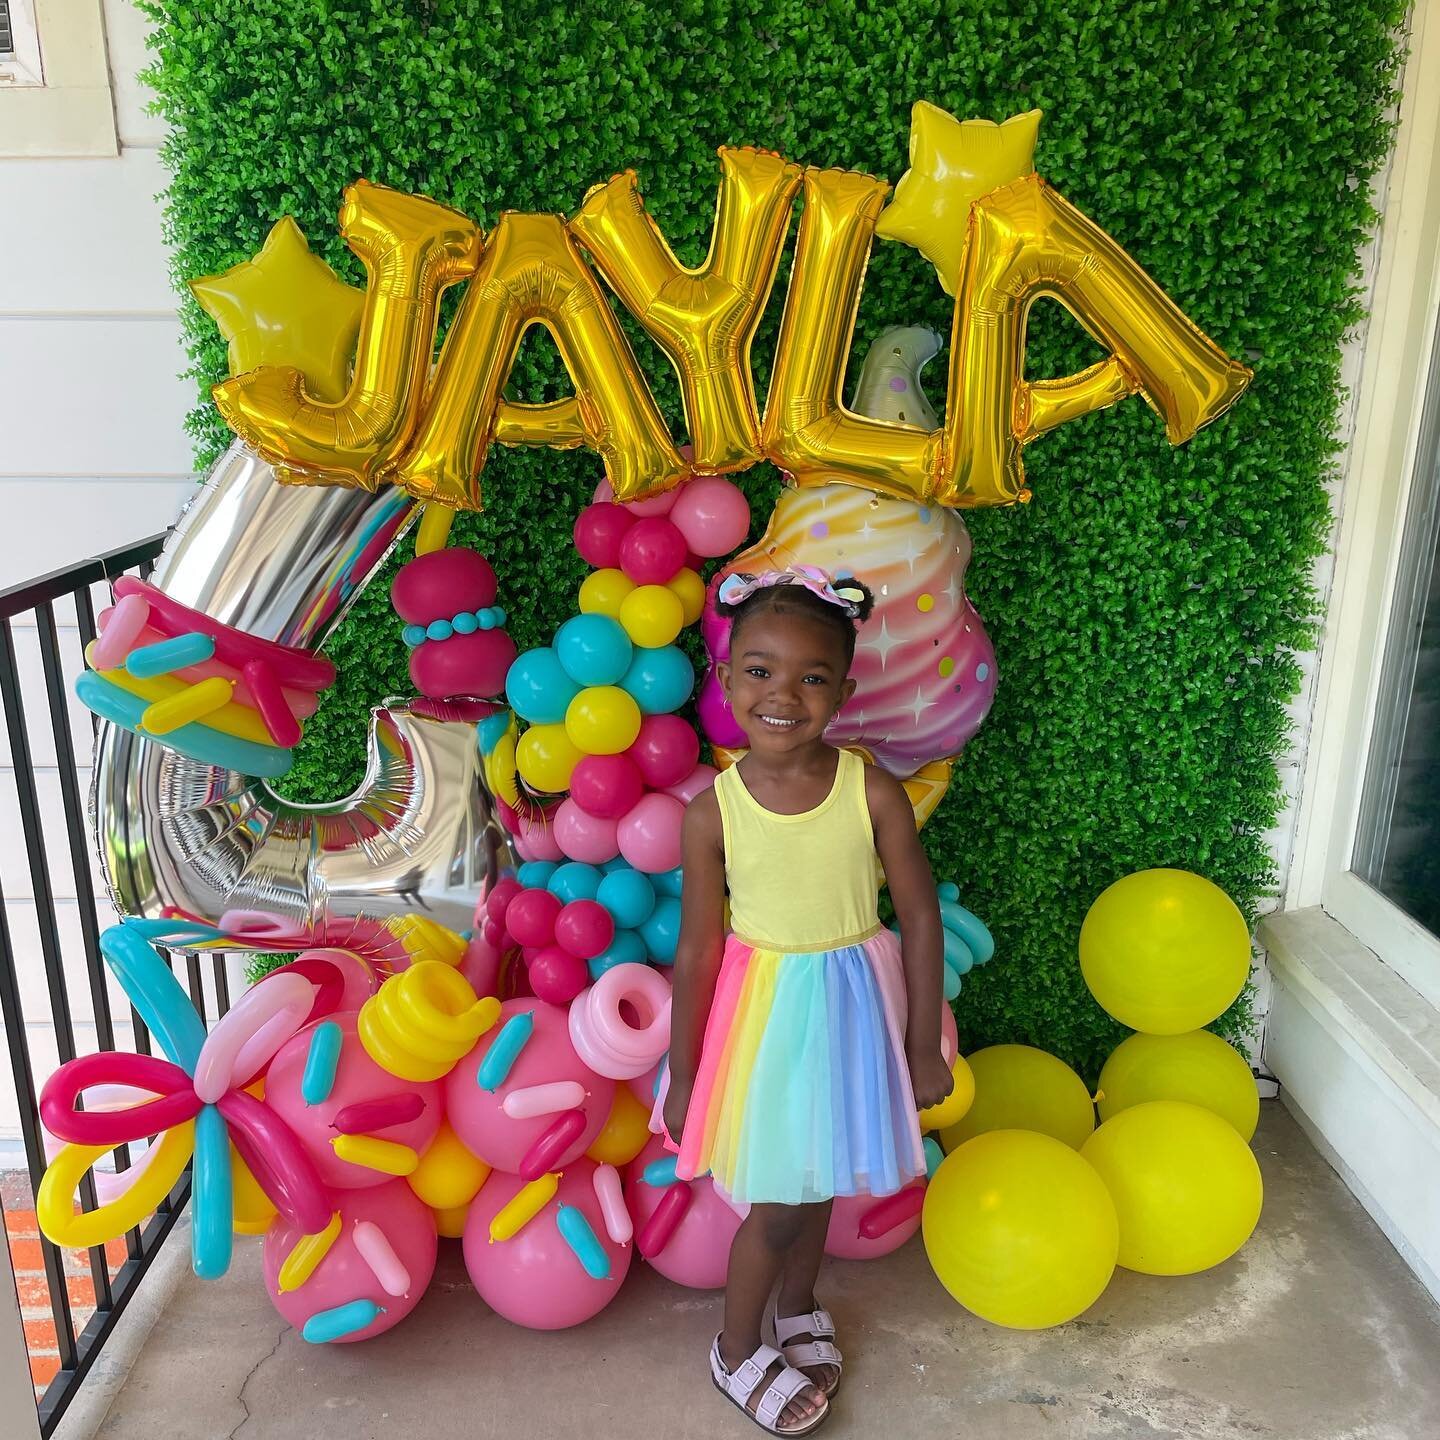 To my perfect gift from God @jaylatheheiress Happy 4th Birthday!!!!!!! 

Jayla, you are a complete vibe and everything I could wish for in a daughter. You make our family complete in so many ways. I can&rsquo;t wait to see all the amazing things you 